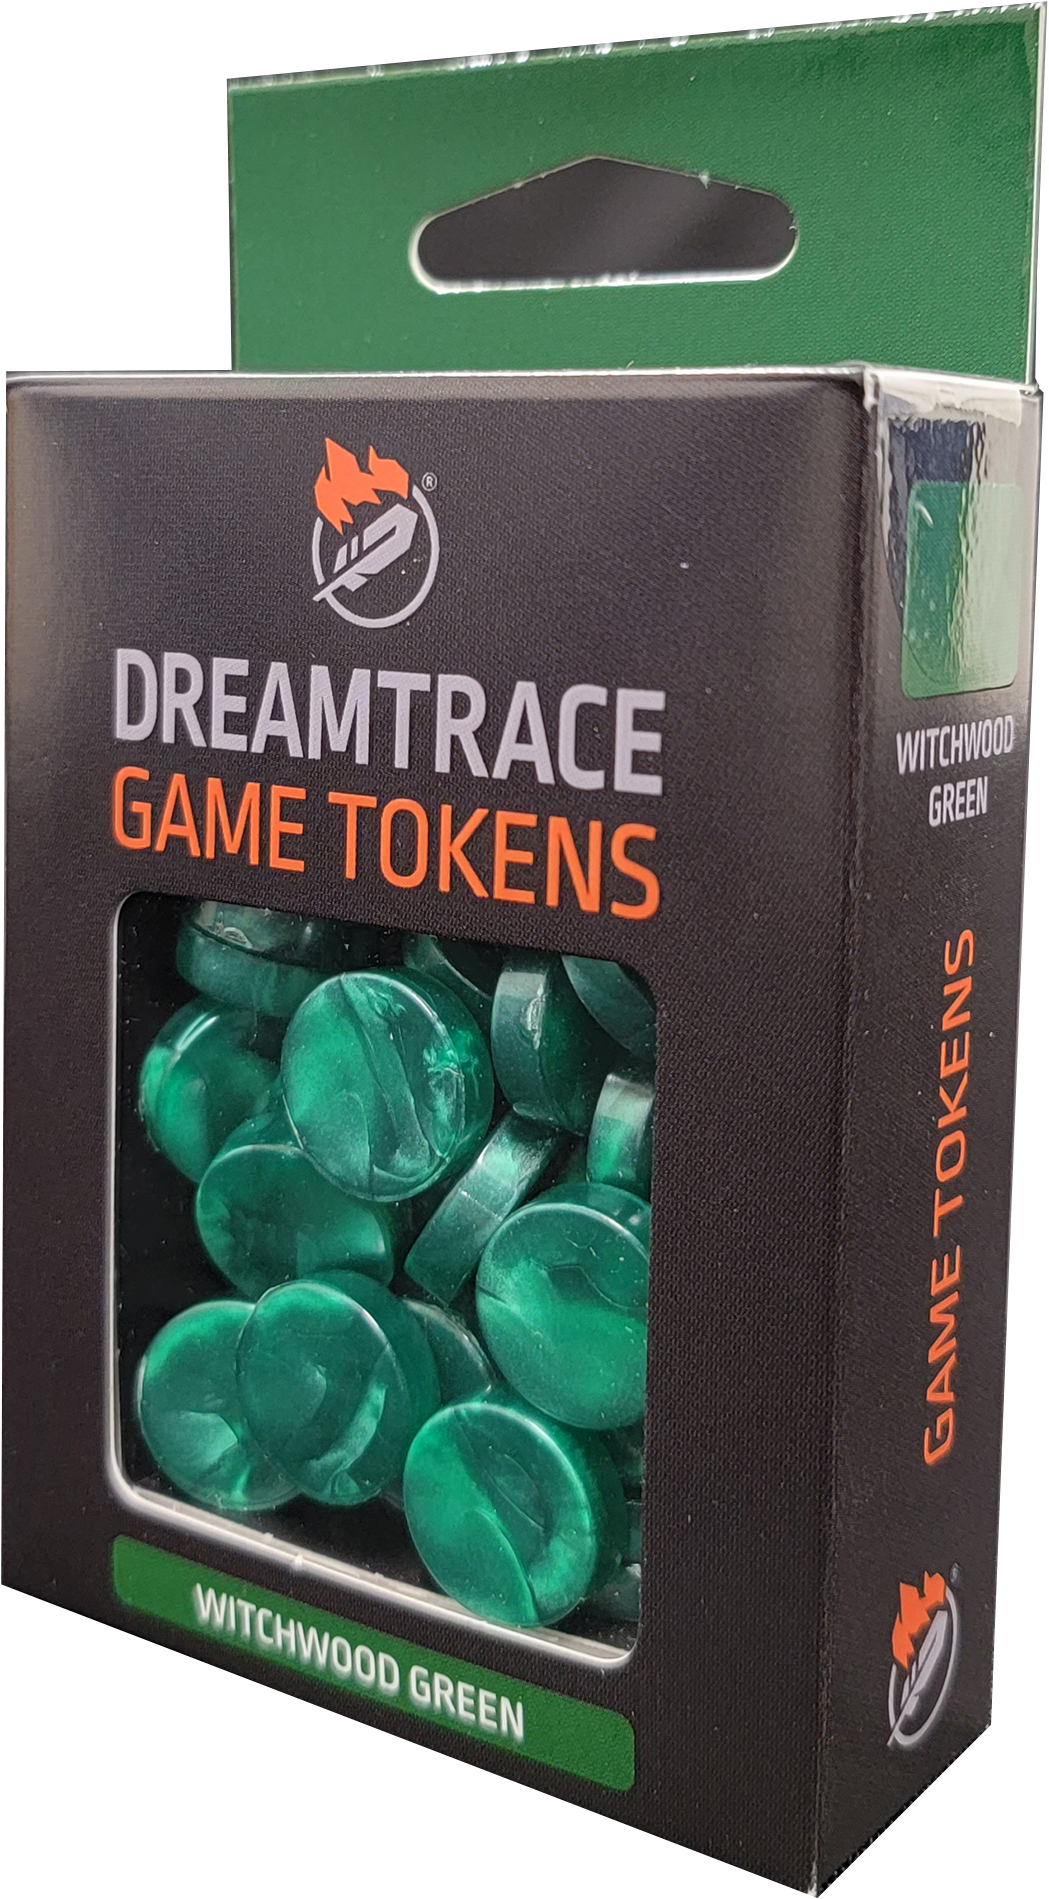 Dreamtrace Gaming Tokens: Witchwood Green 